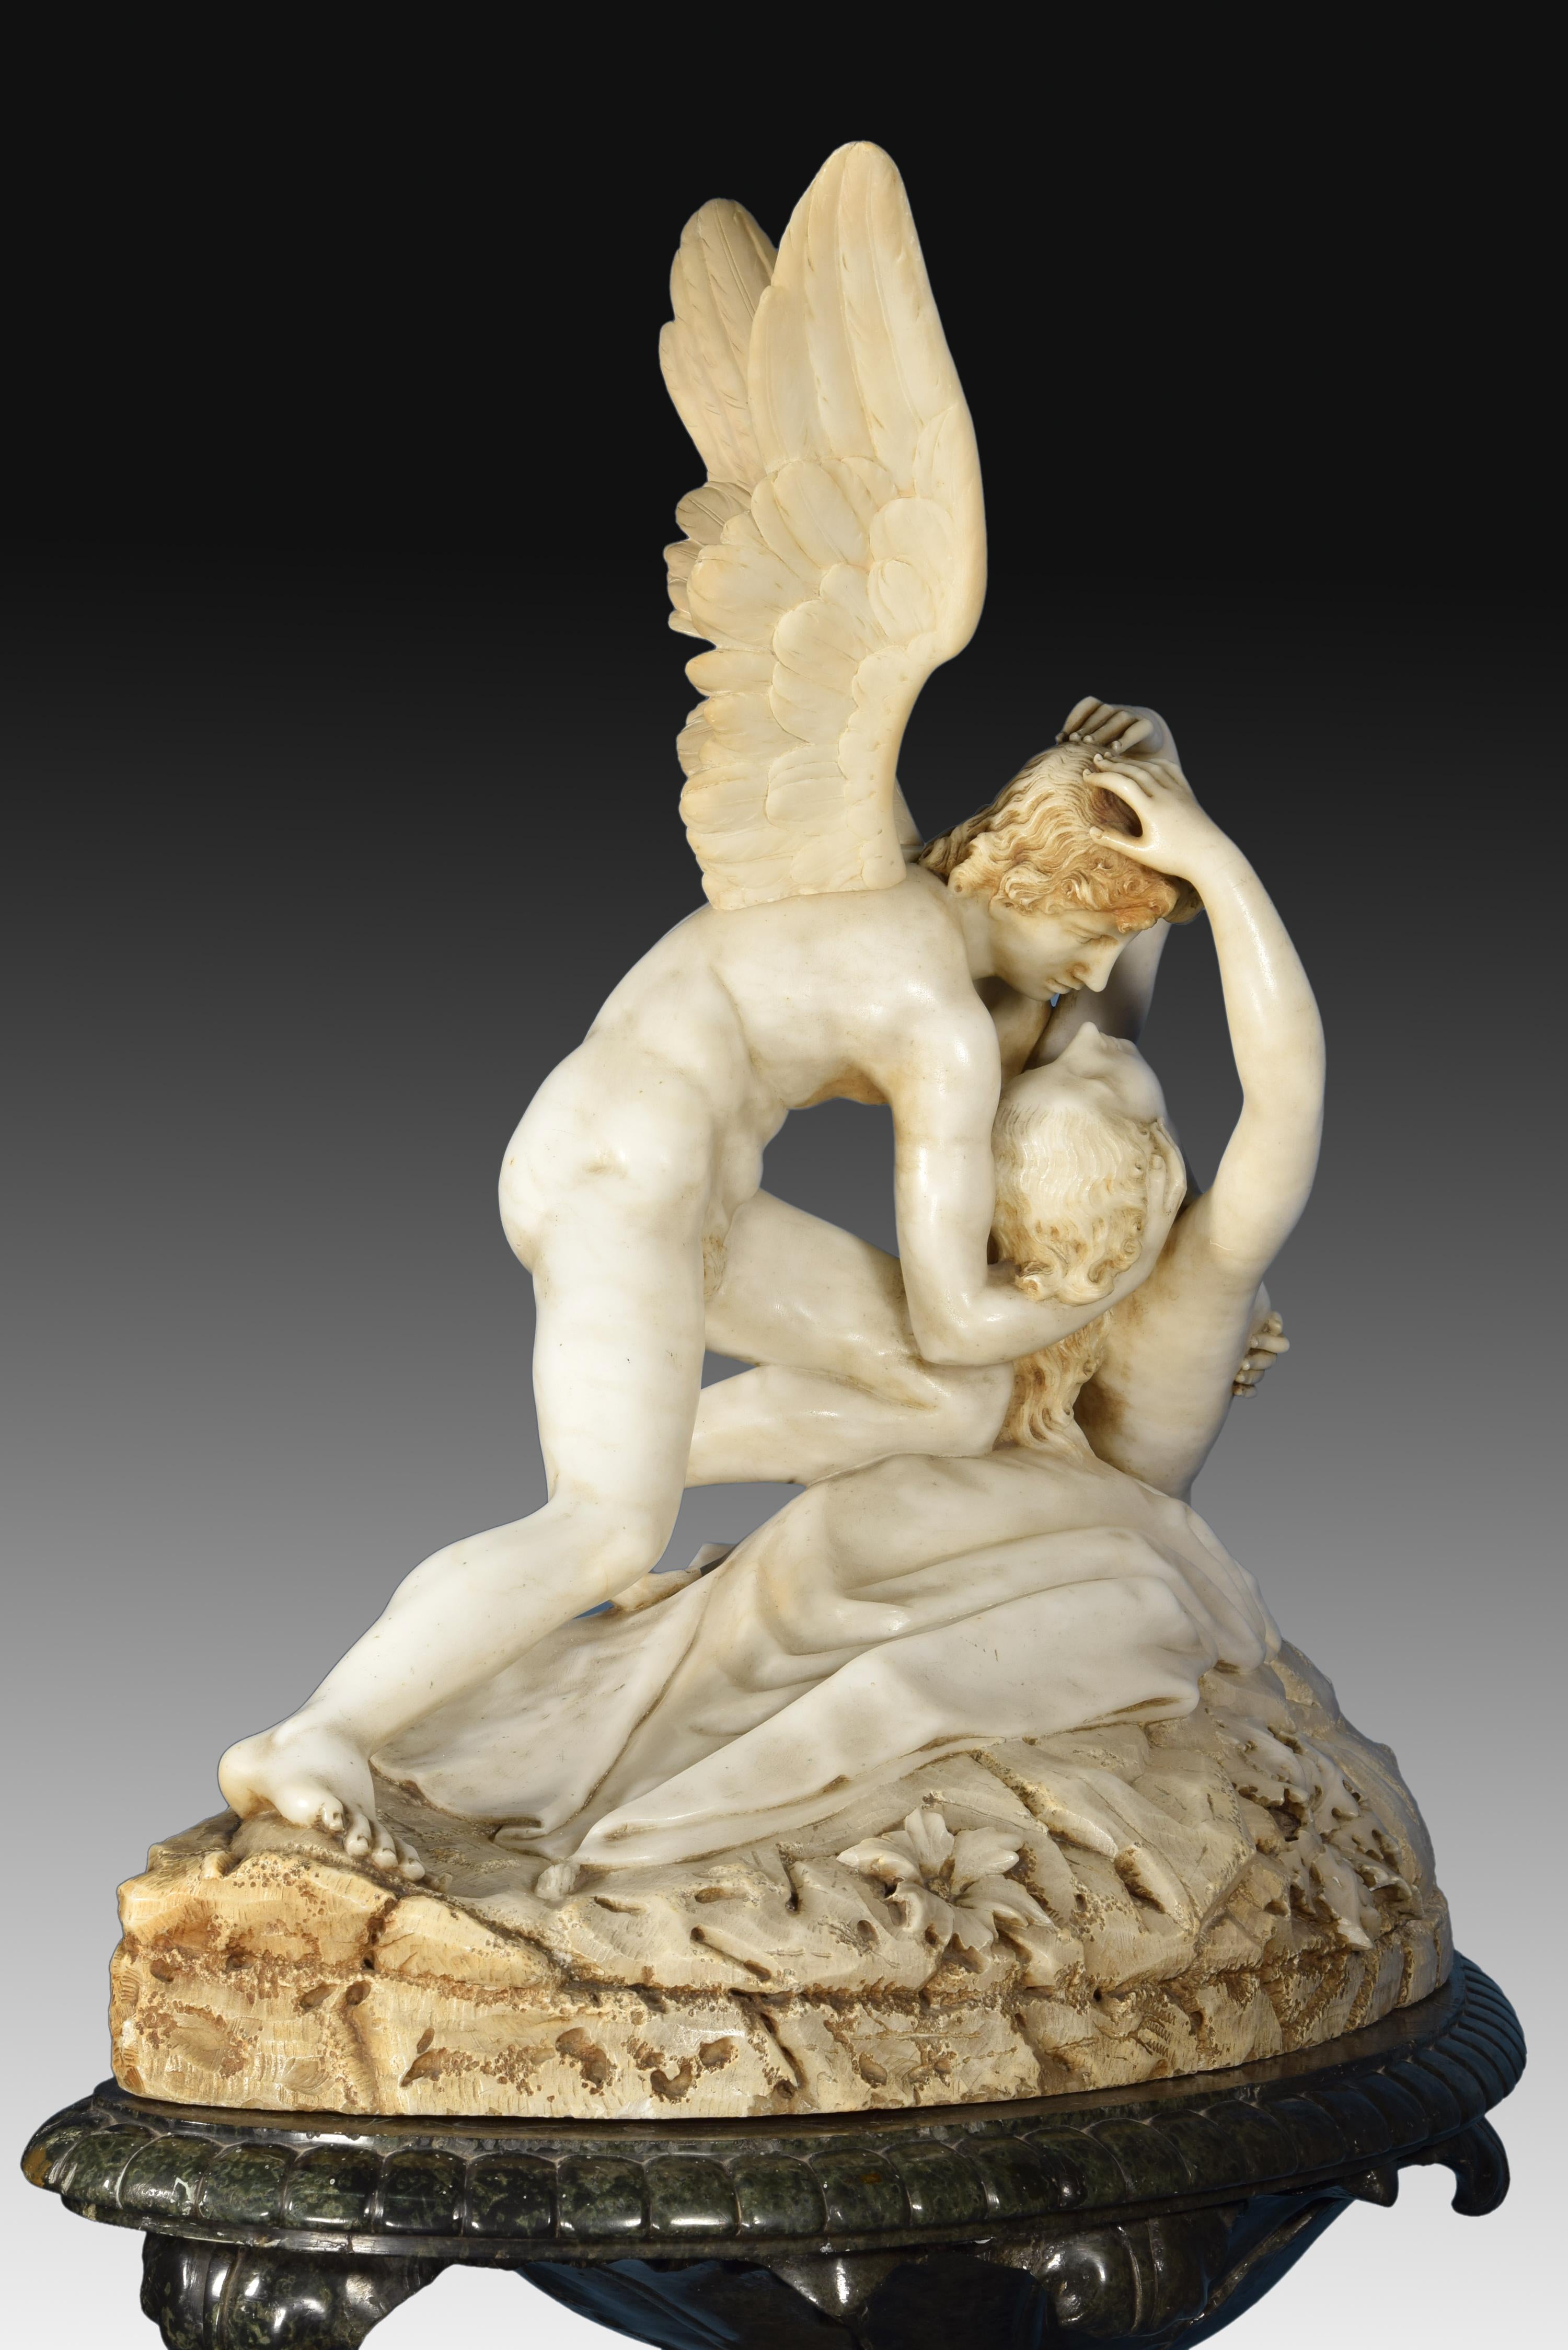 Other Psyche Revived by Cupid's Kiss, Alabaster, Marble, after Antonio Canova